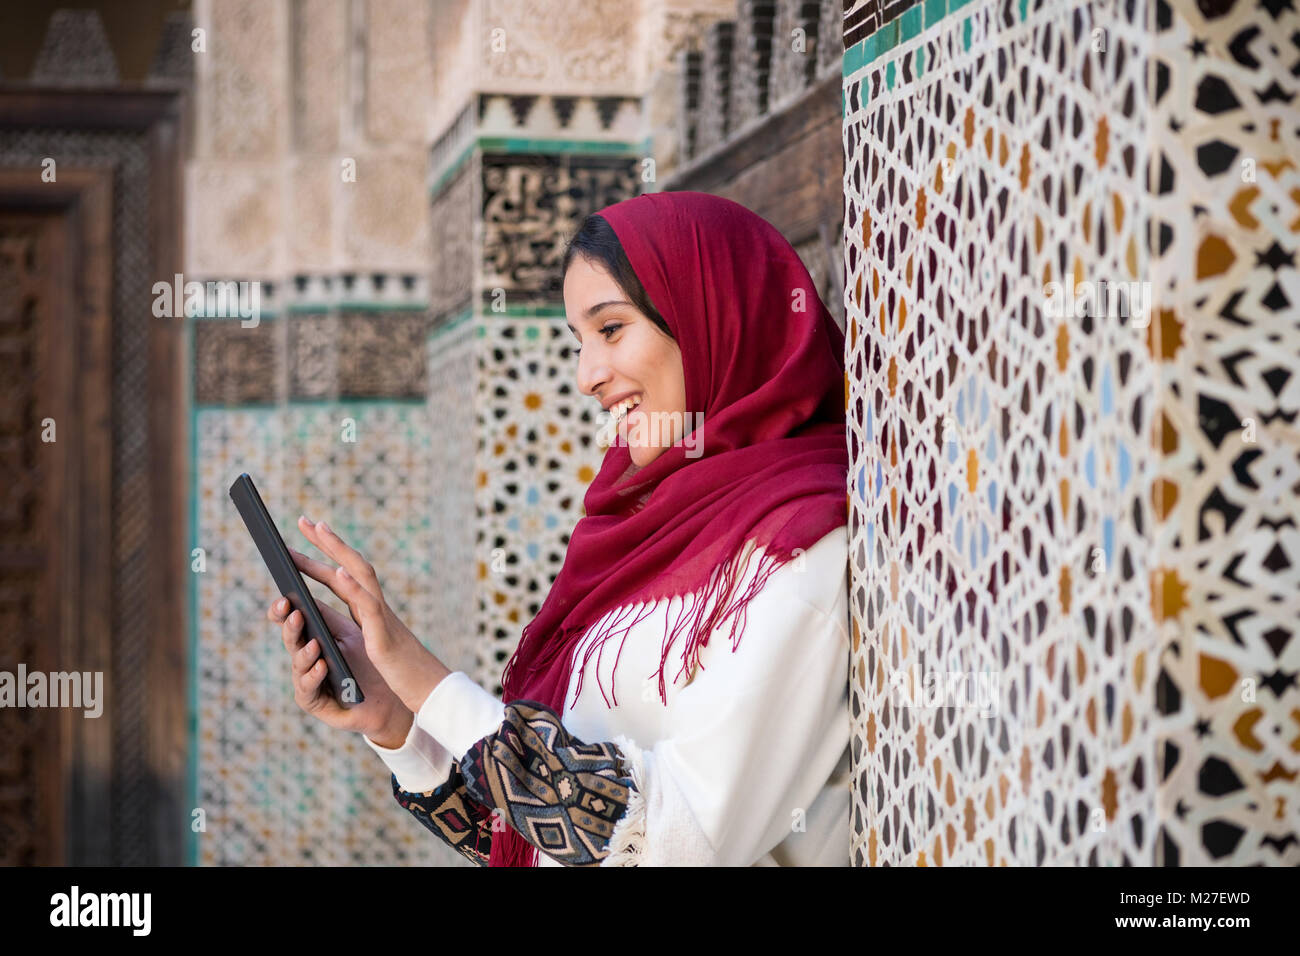 Smiling Arab woman in traditional clothing with red headscarf on her head working on tablet Stock Photo